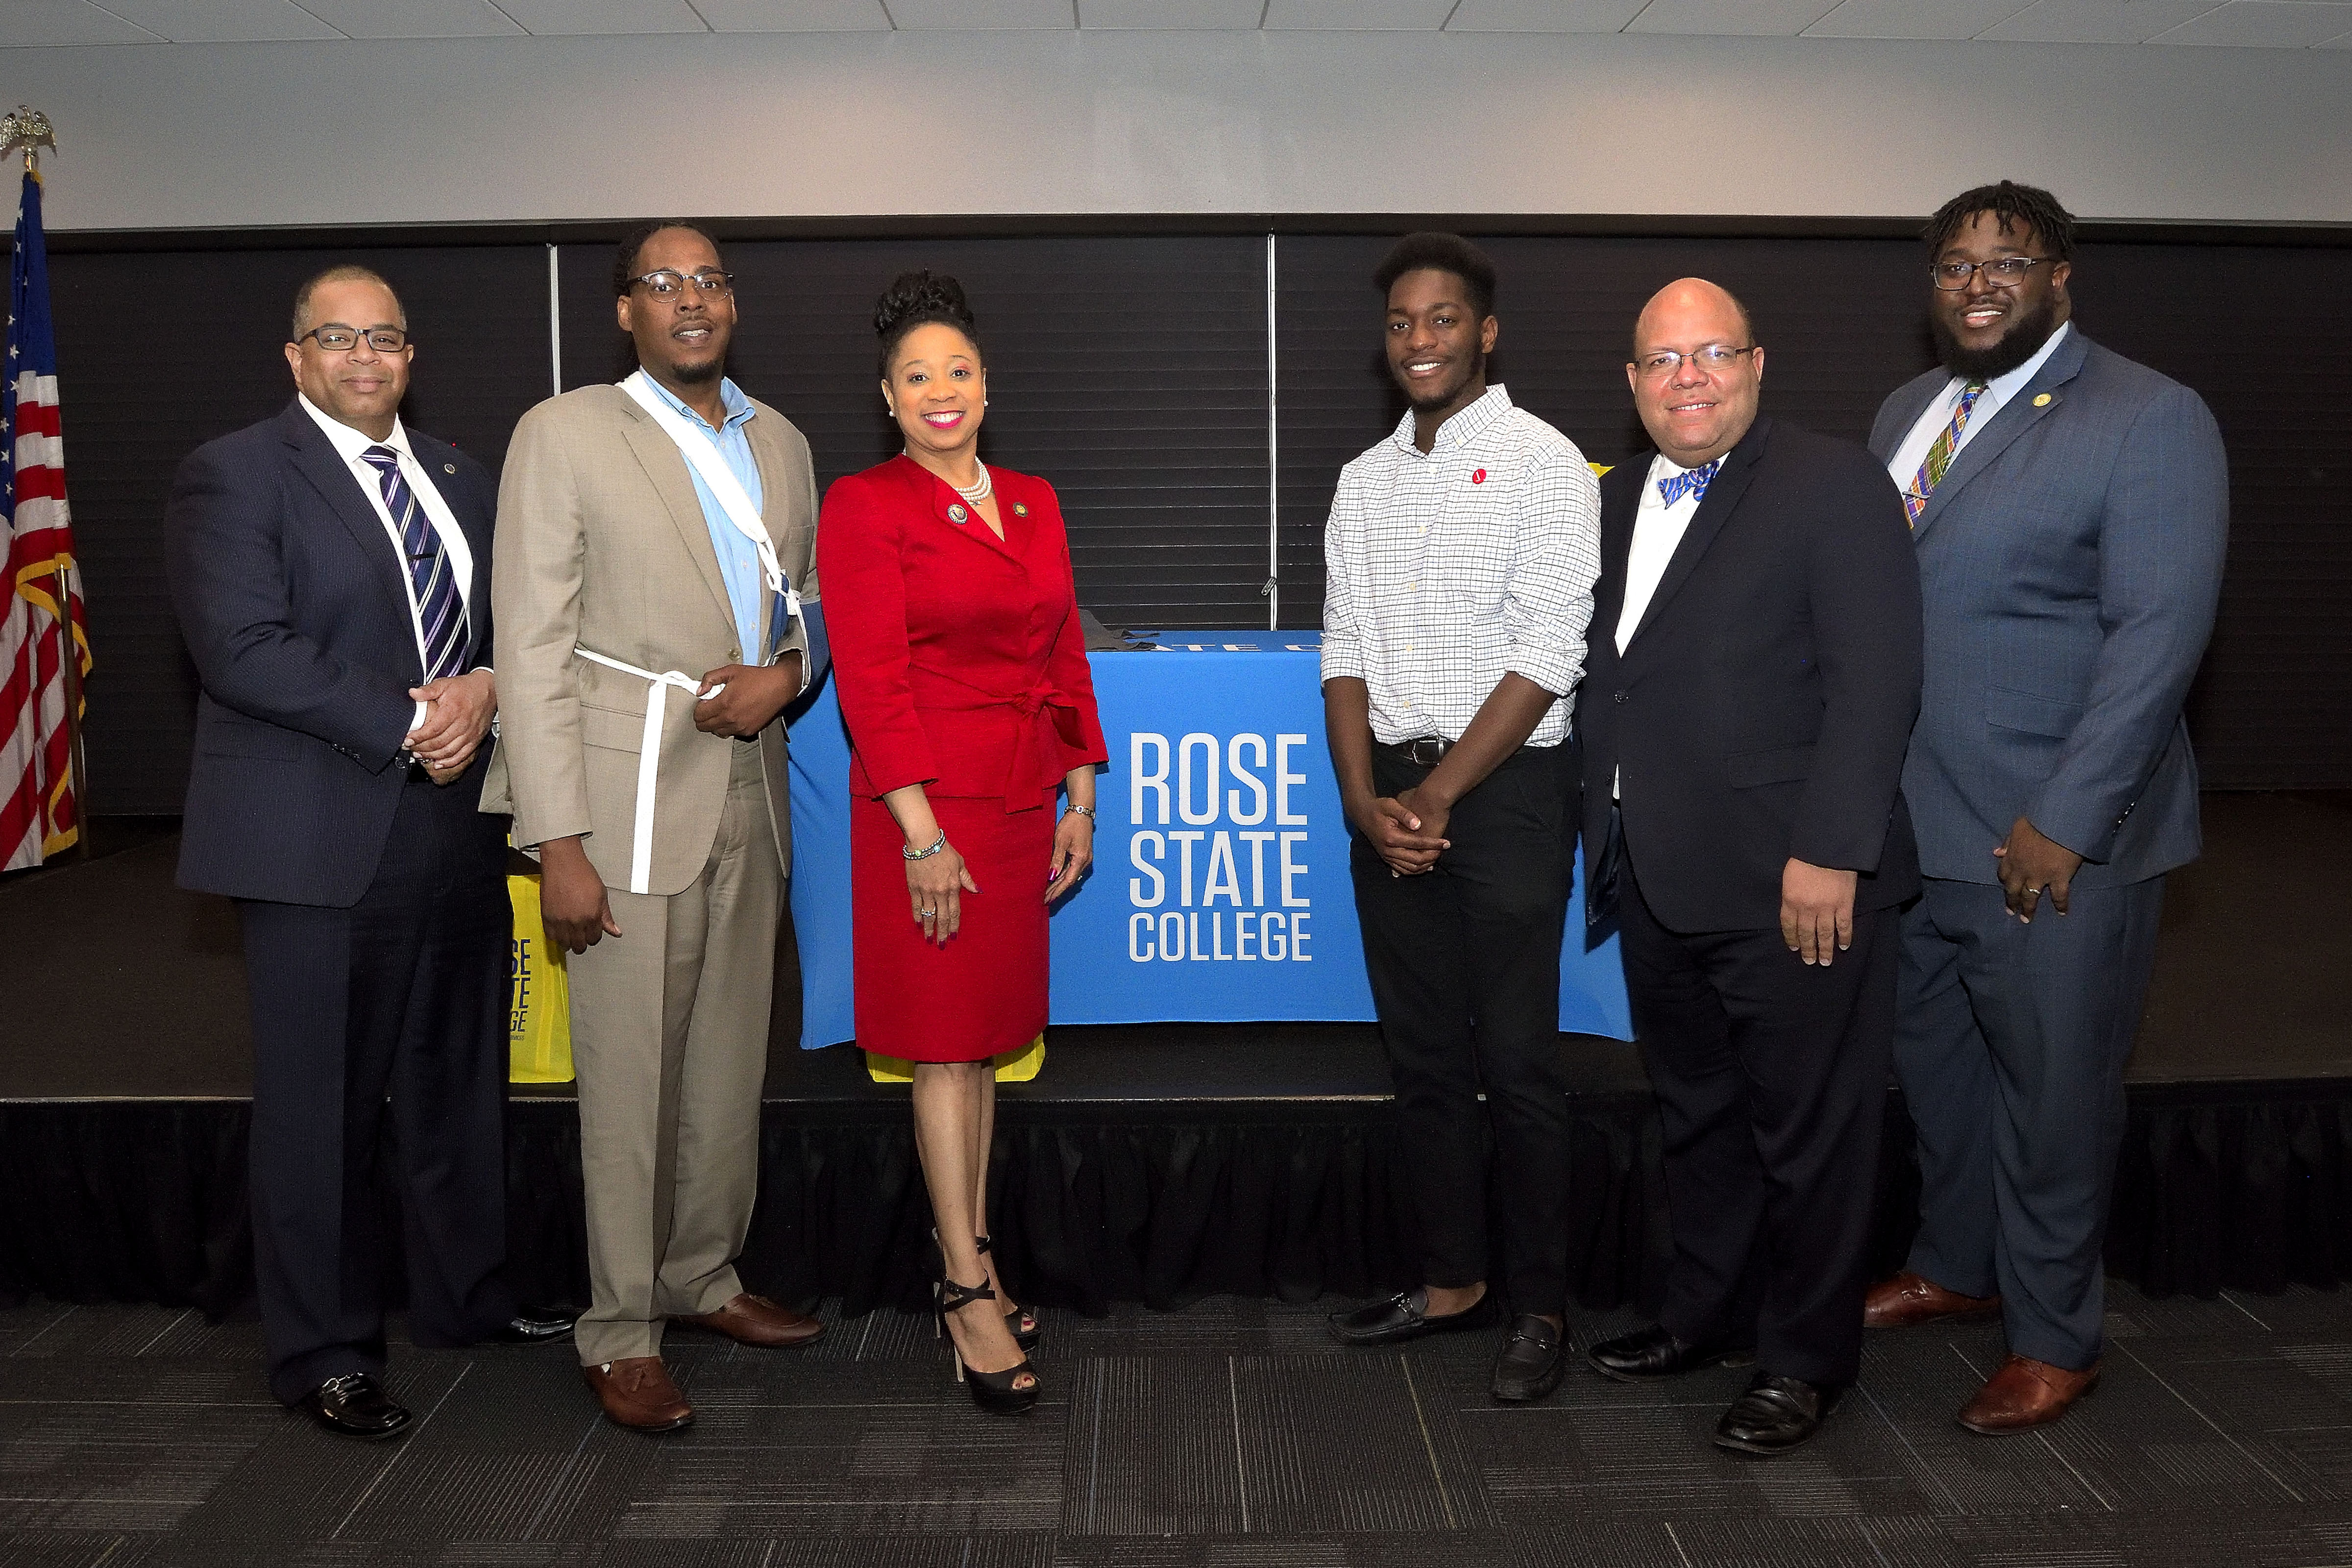 2017 Rose State Black Male Summit , speakers and organizers